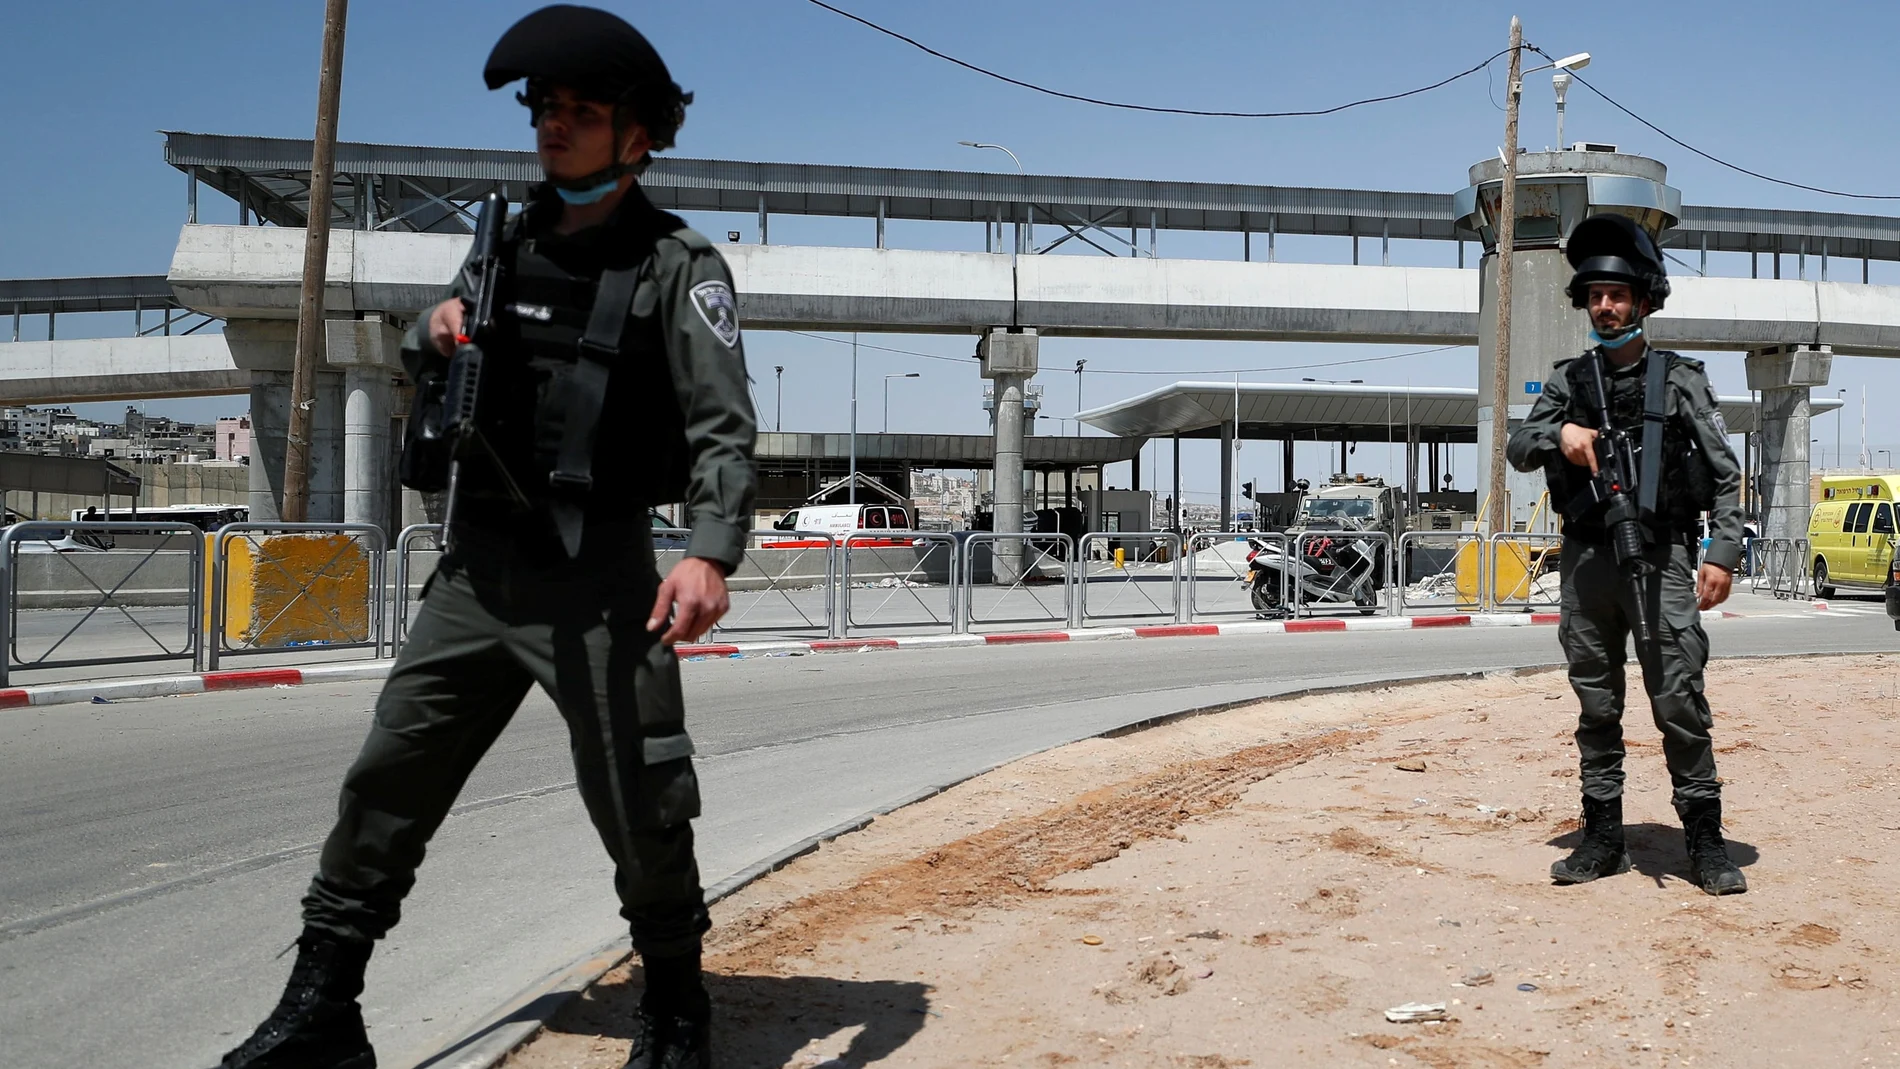 Israeli forces work at the scene of an incident at Qalandia checkpoint in the Israeli-occupied West Bank